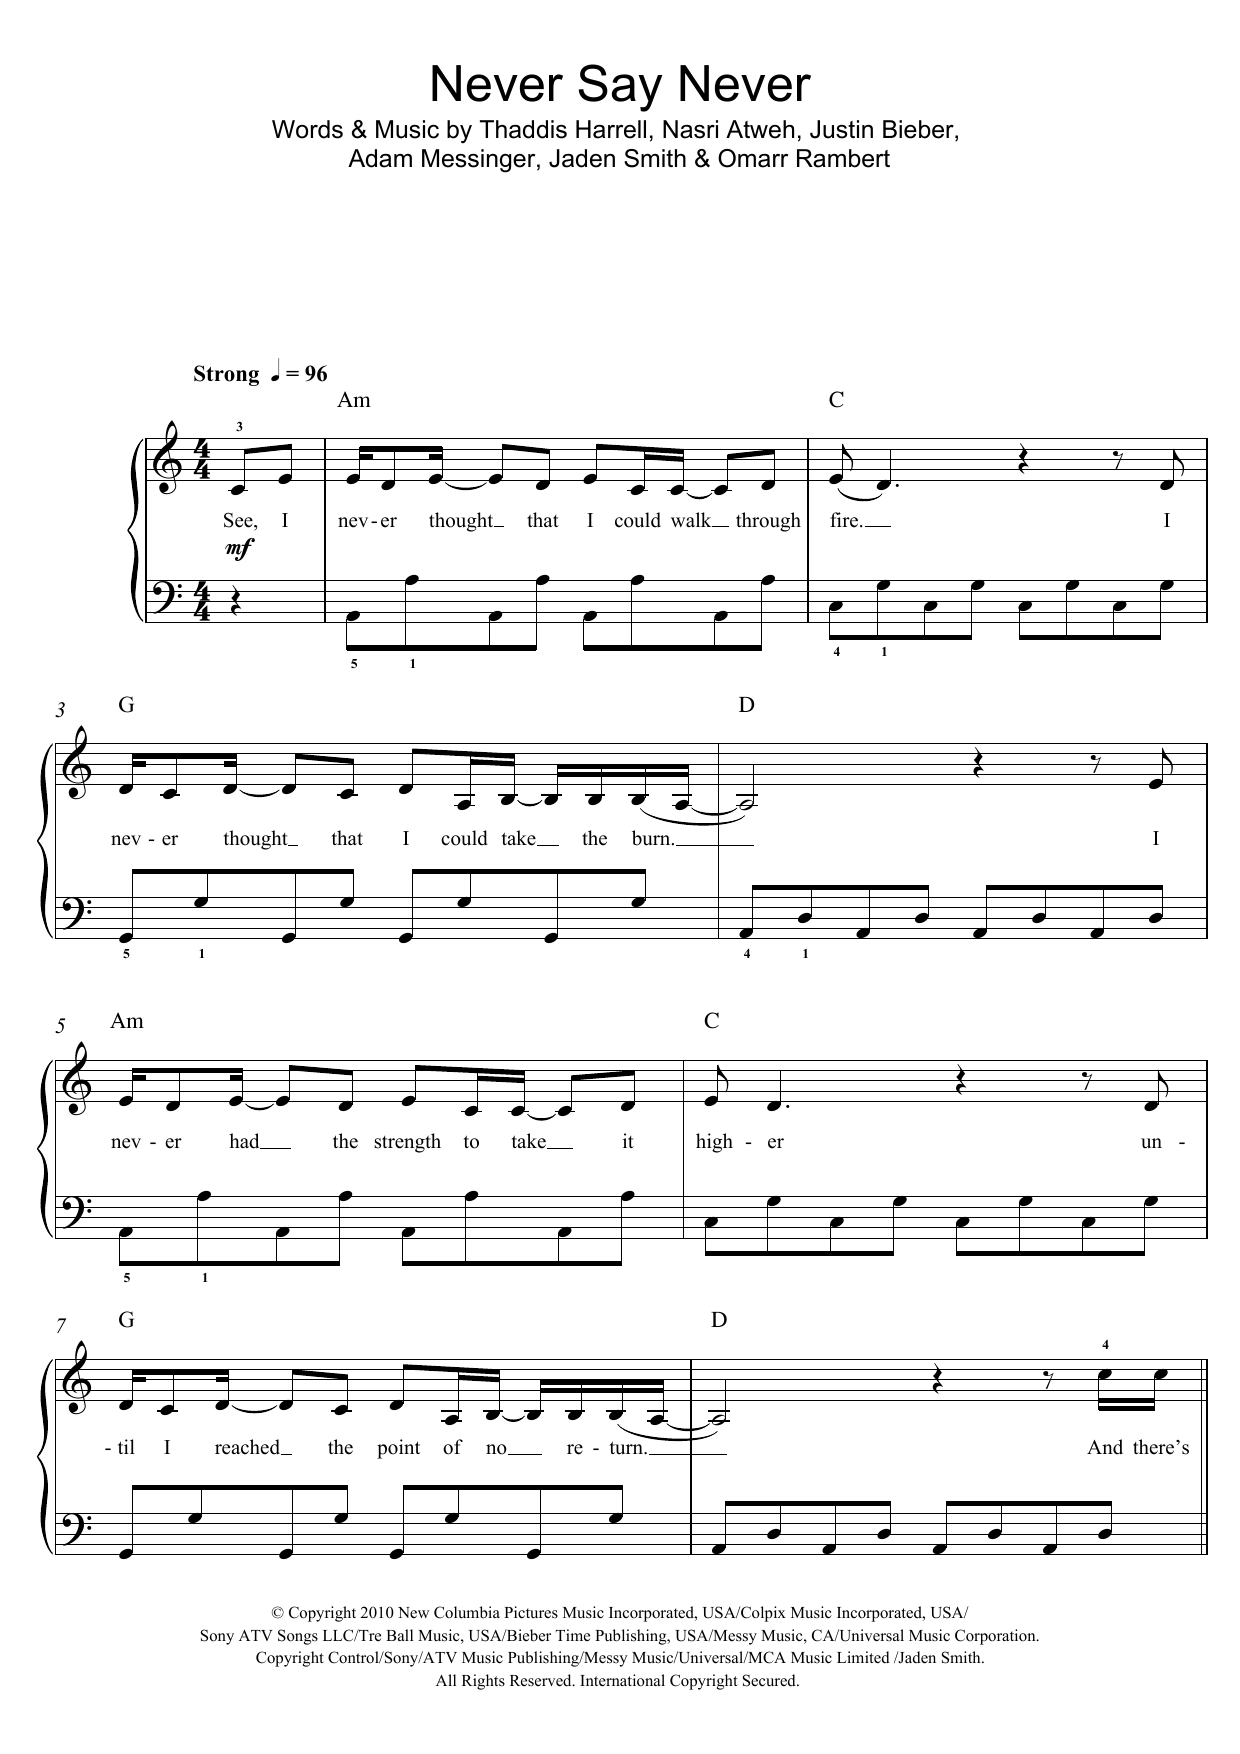 Download Justin Bieber Never Say Never (feat. Jaden Smith) Sheet Music